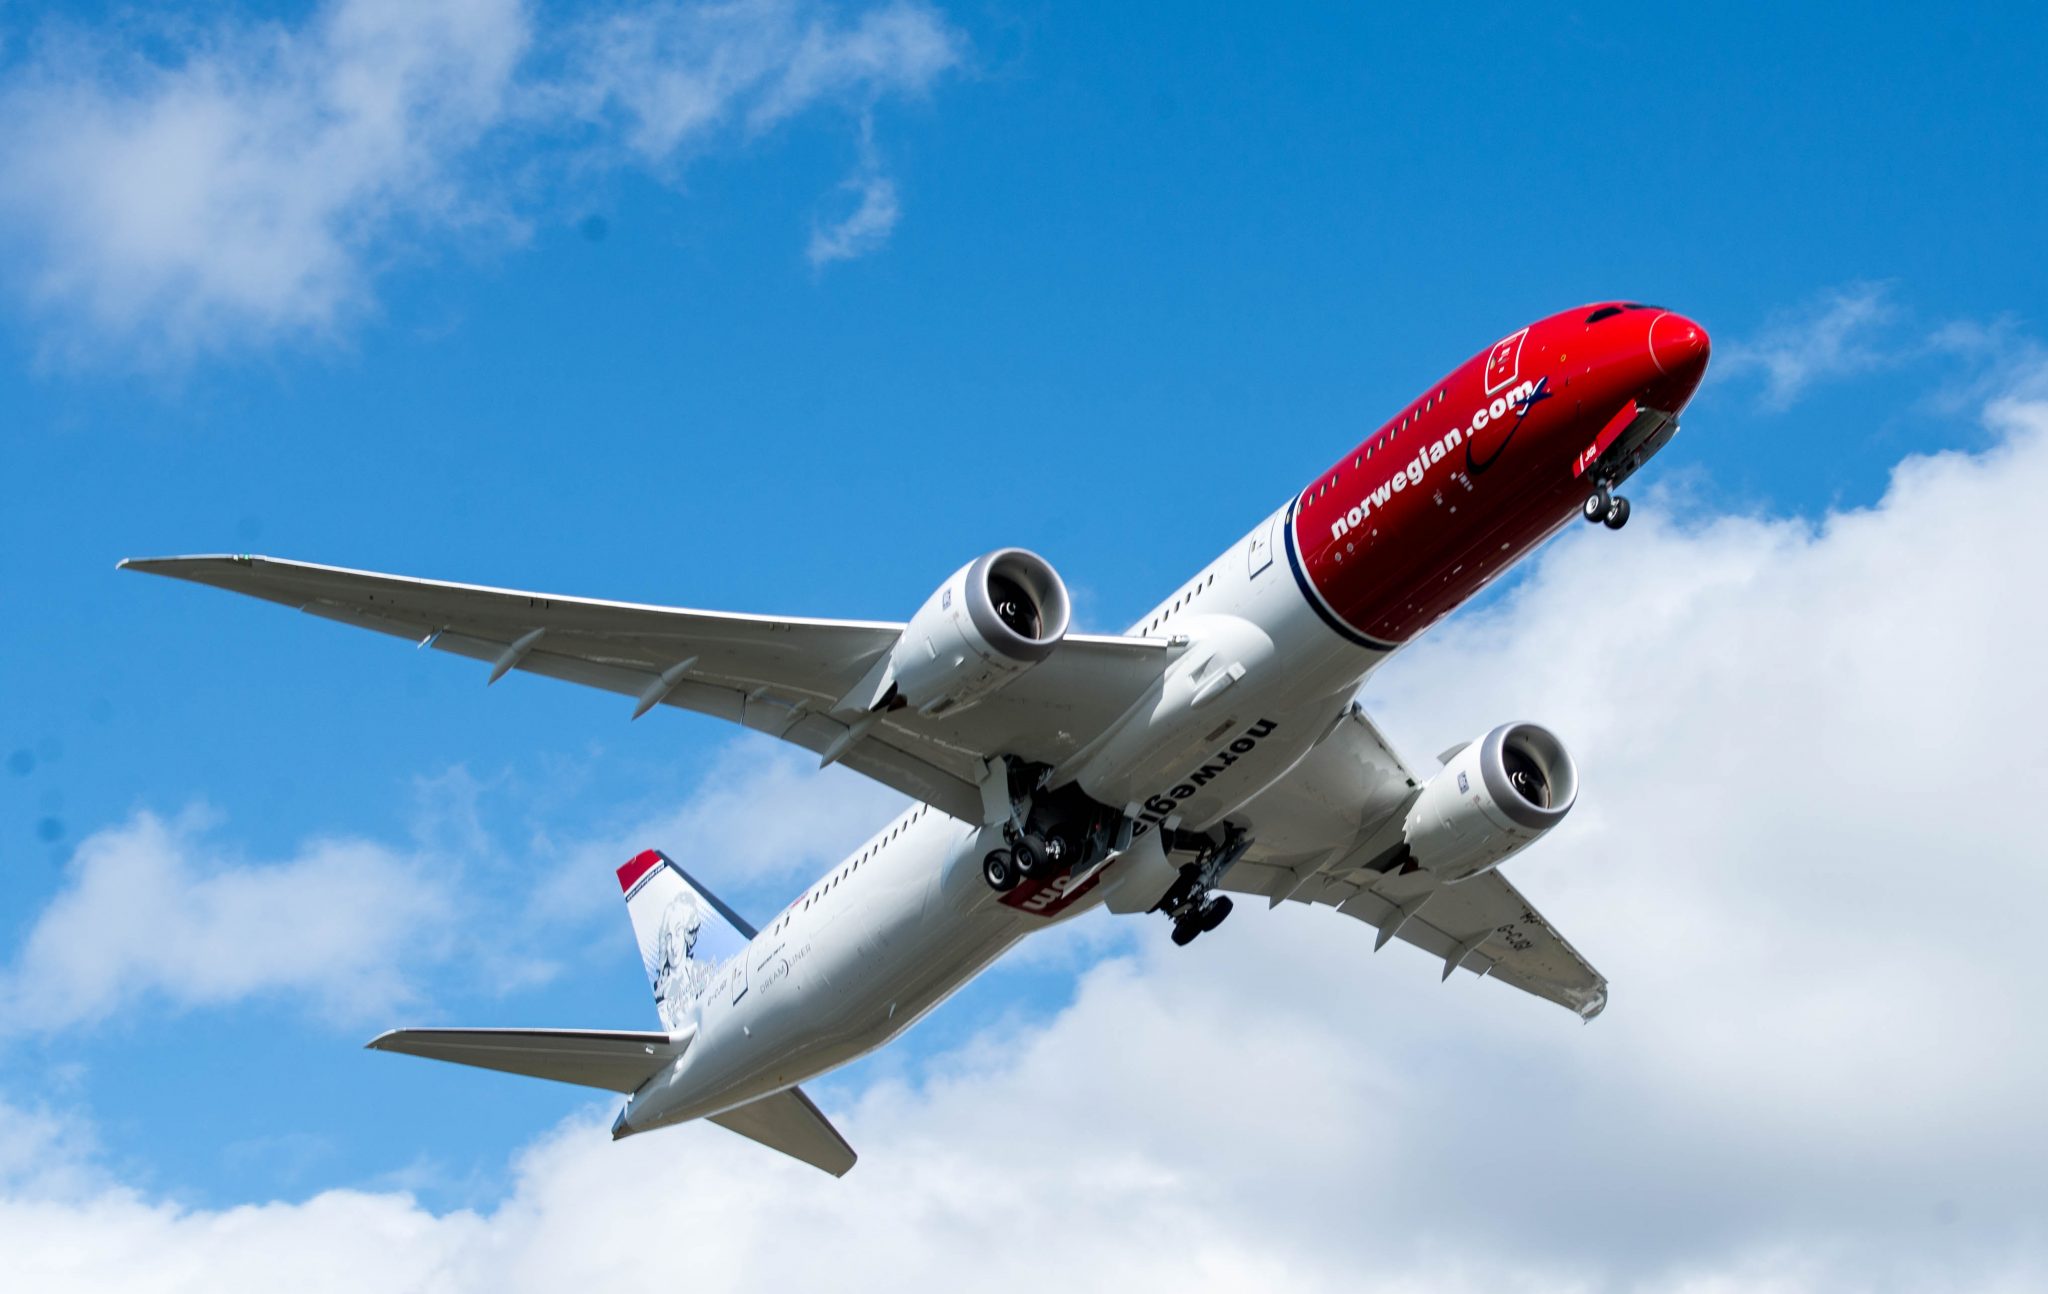 Norwegian reports a pre-tax result of 861 million NOK